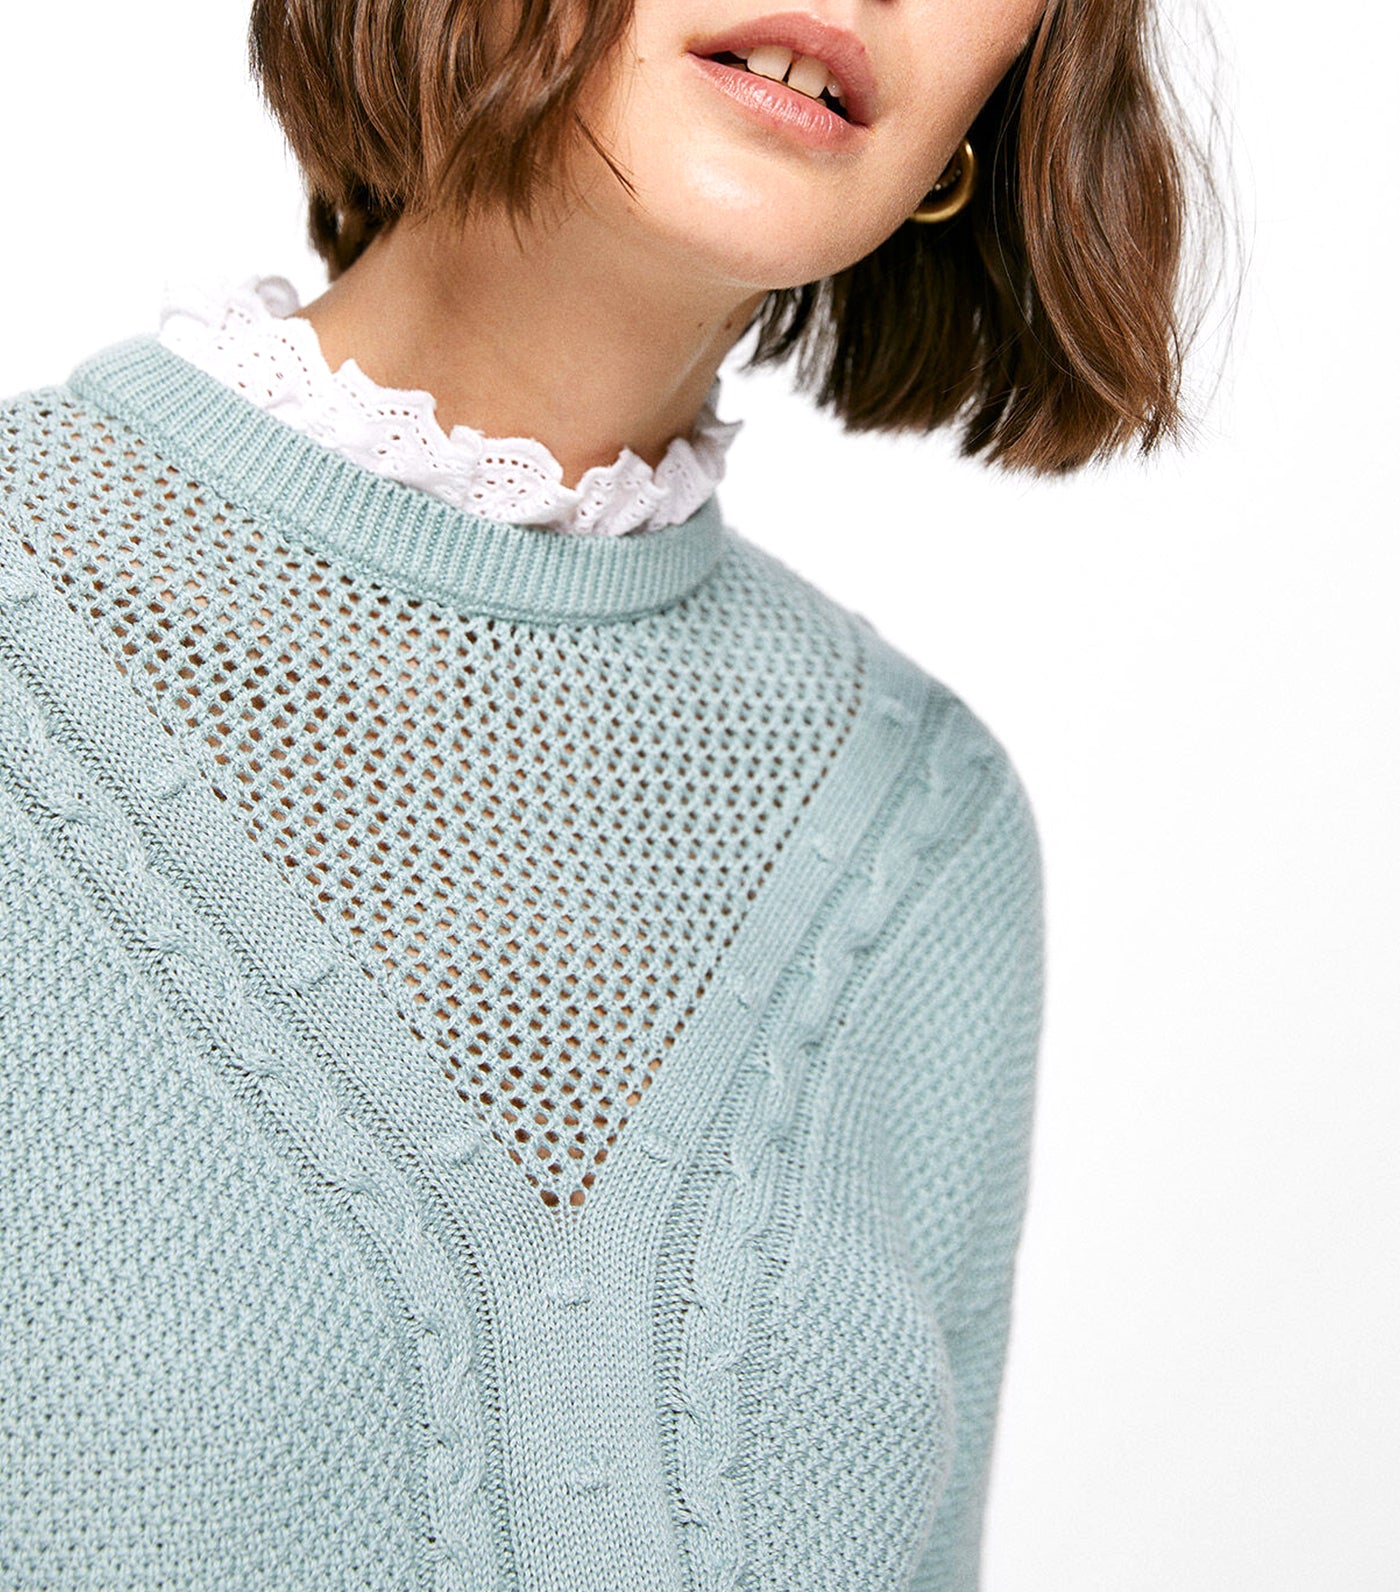 Cable Knit Sweater Blue